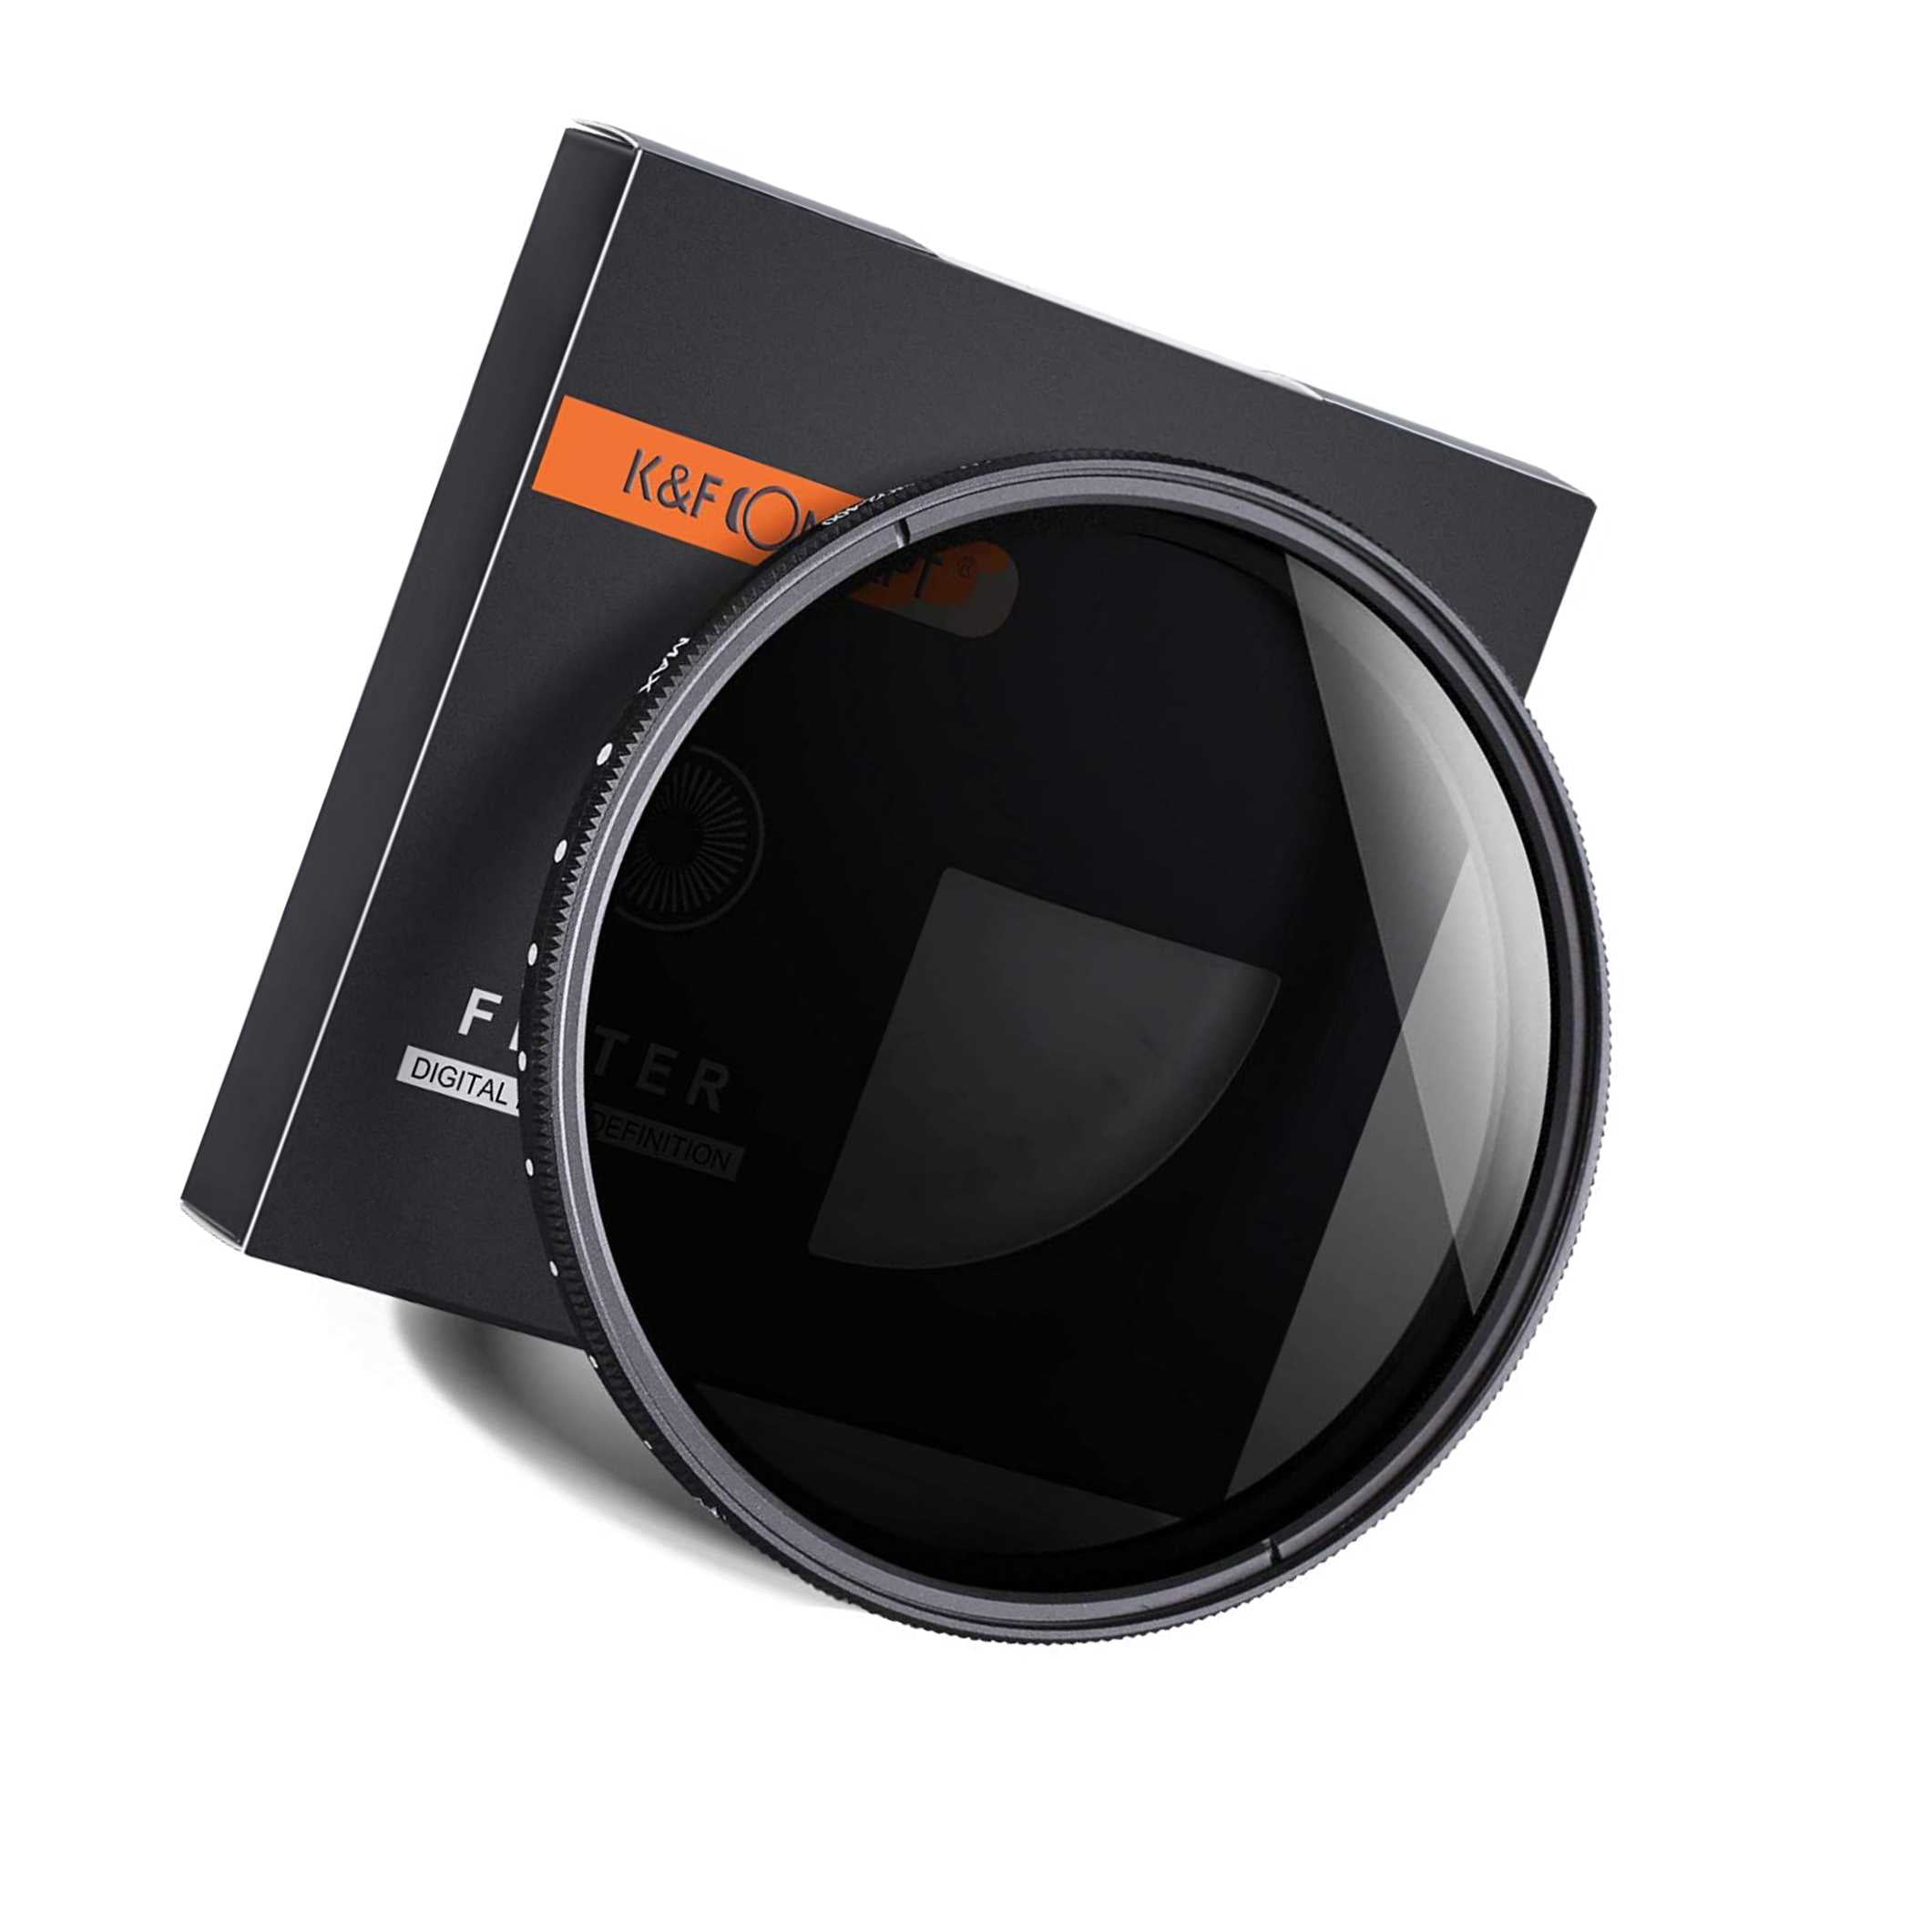 ND2 to ND400 Filter Durable CAOMING 55mm ND Fader Neutral Density Adjustable Variable Filter 